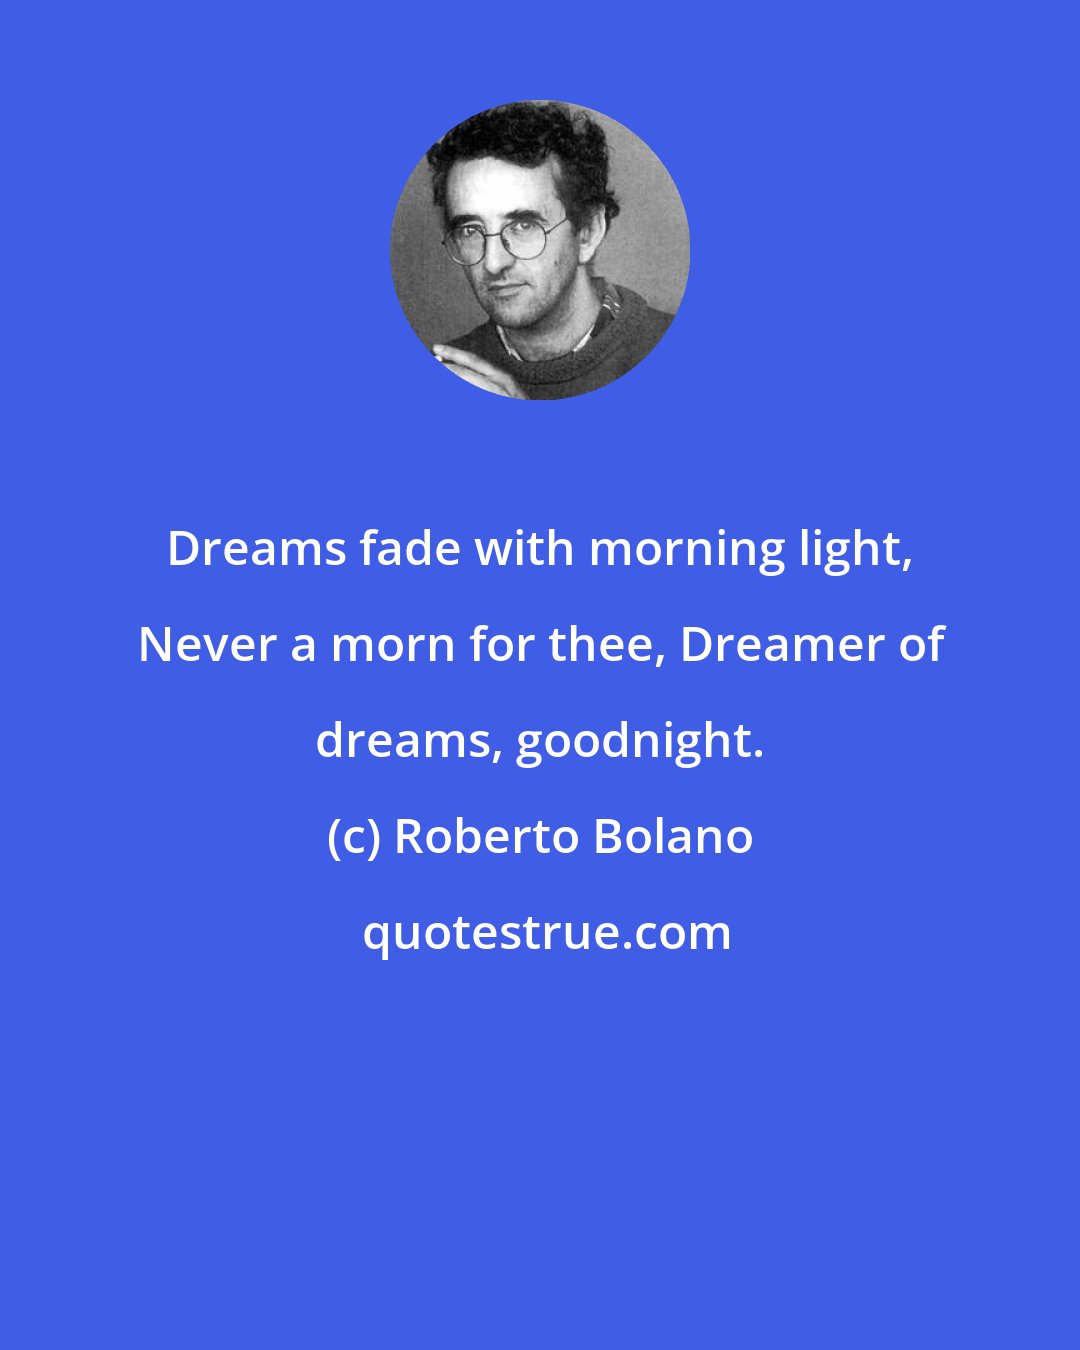 Roberto Bolano: Dreams fade with morning light, Never a morn for thee, Dreamer of dreams, goodnight.